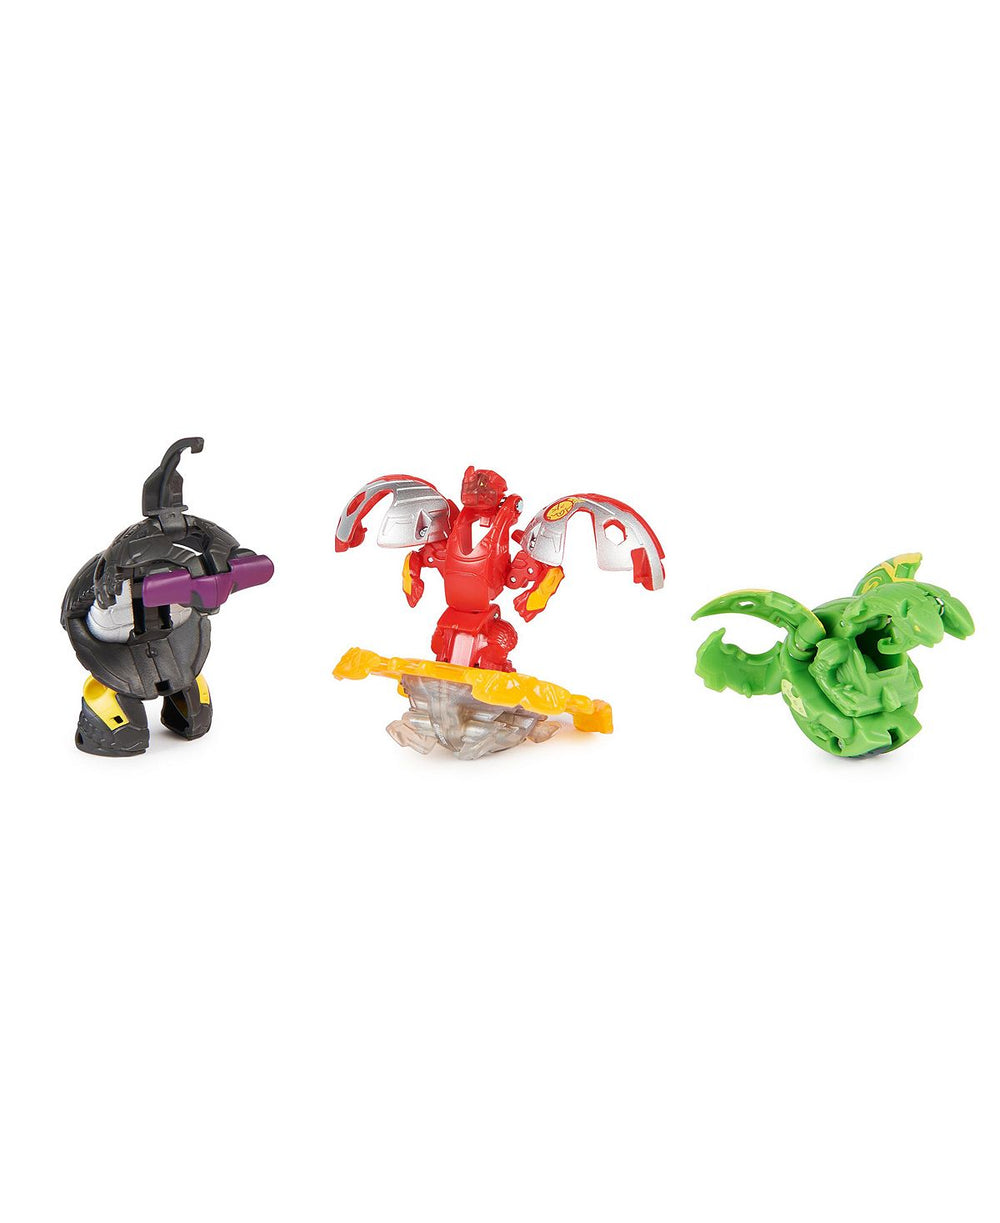 Bakugan Starter 3-Pack with Special Attack Dragonoid, Nillious, Hammerhead, Customizable Spinning Action Figures and Trading Cards